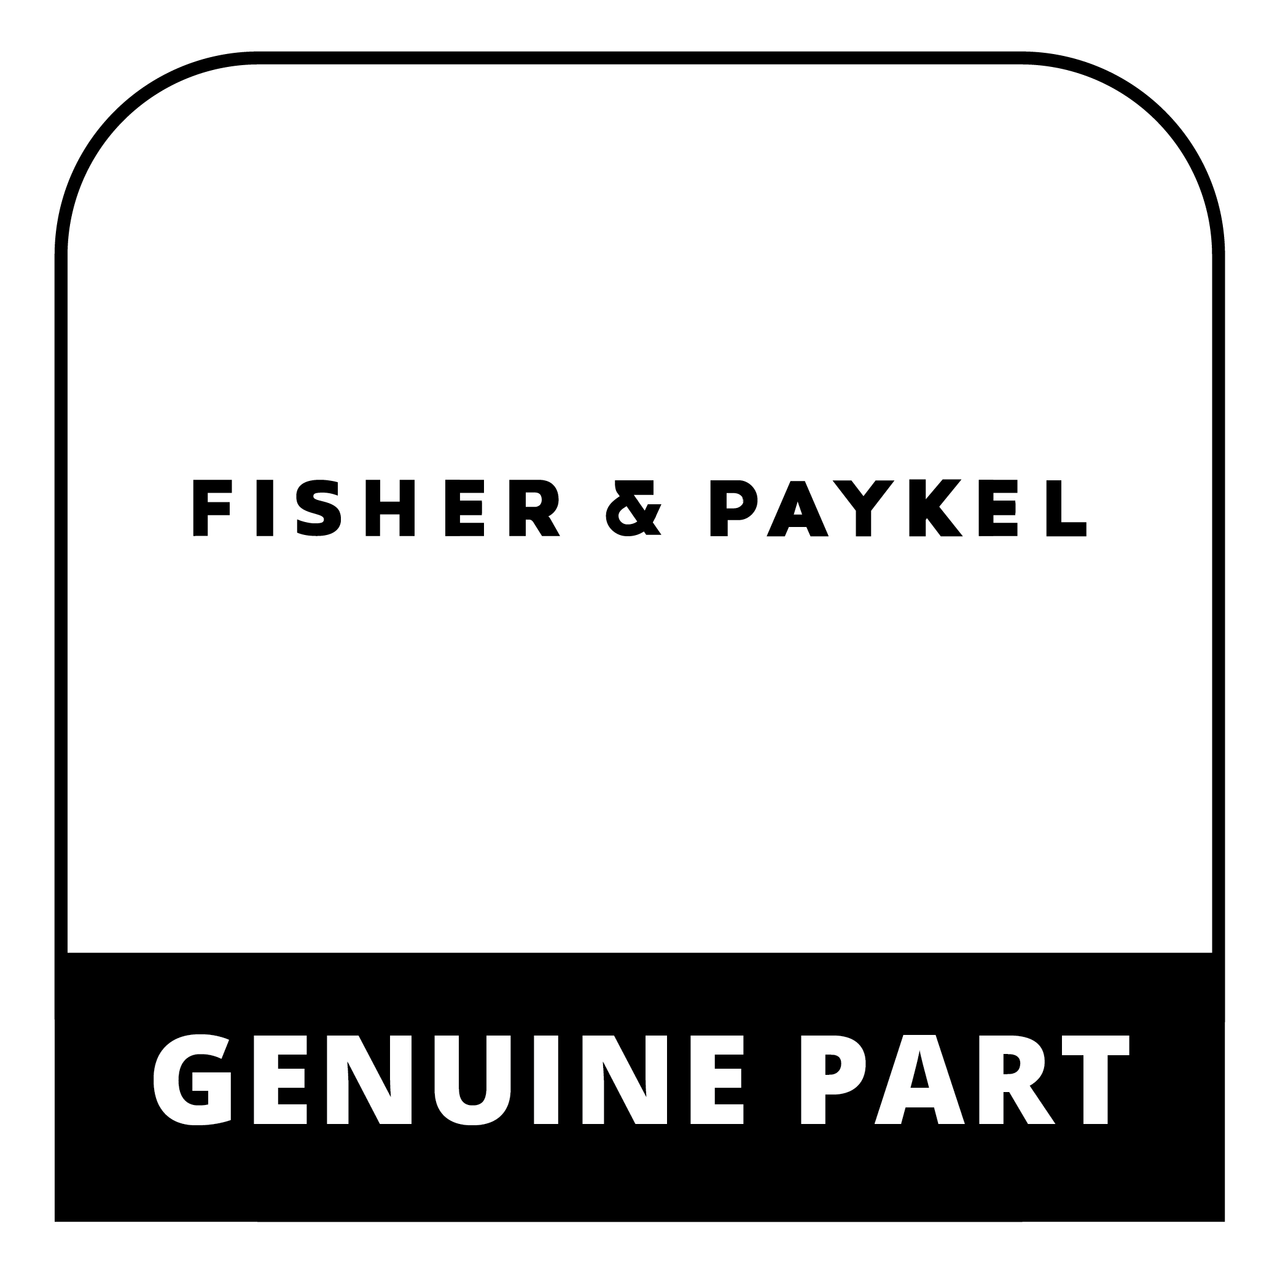 Fisher & Paykel (DCS) 537322P - Board/Mask Asy Master Ctrl 365 - Genuine Fisher & Paykel (DCS) Part